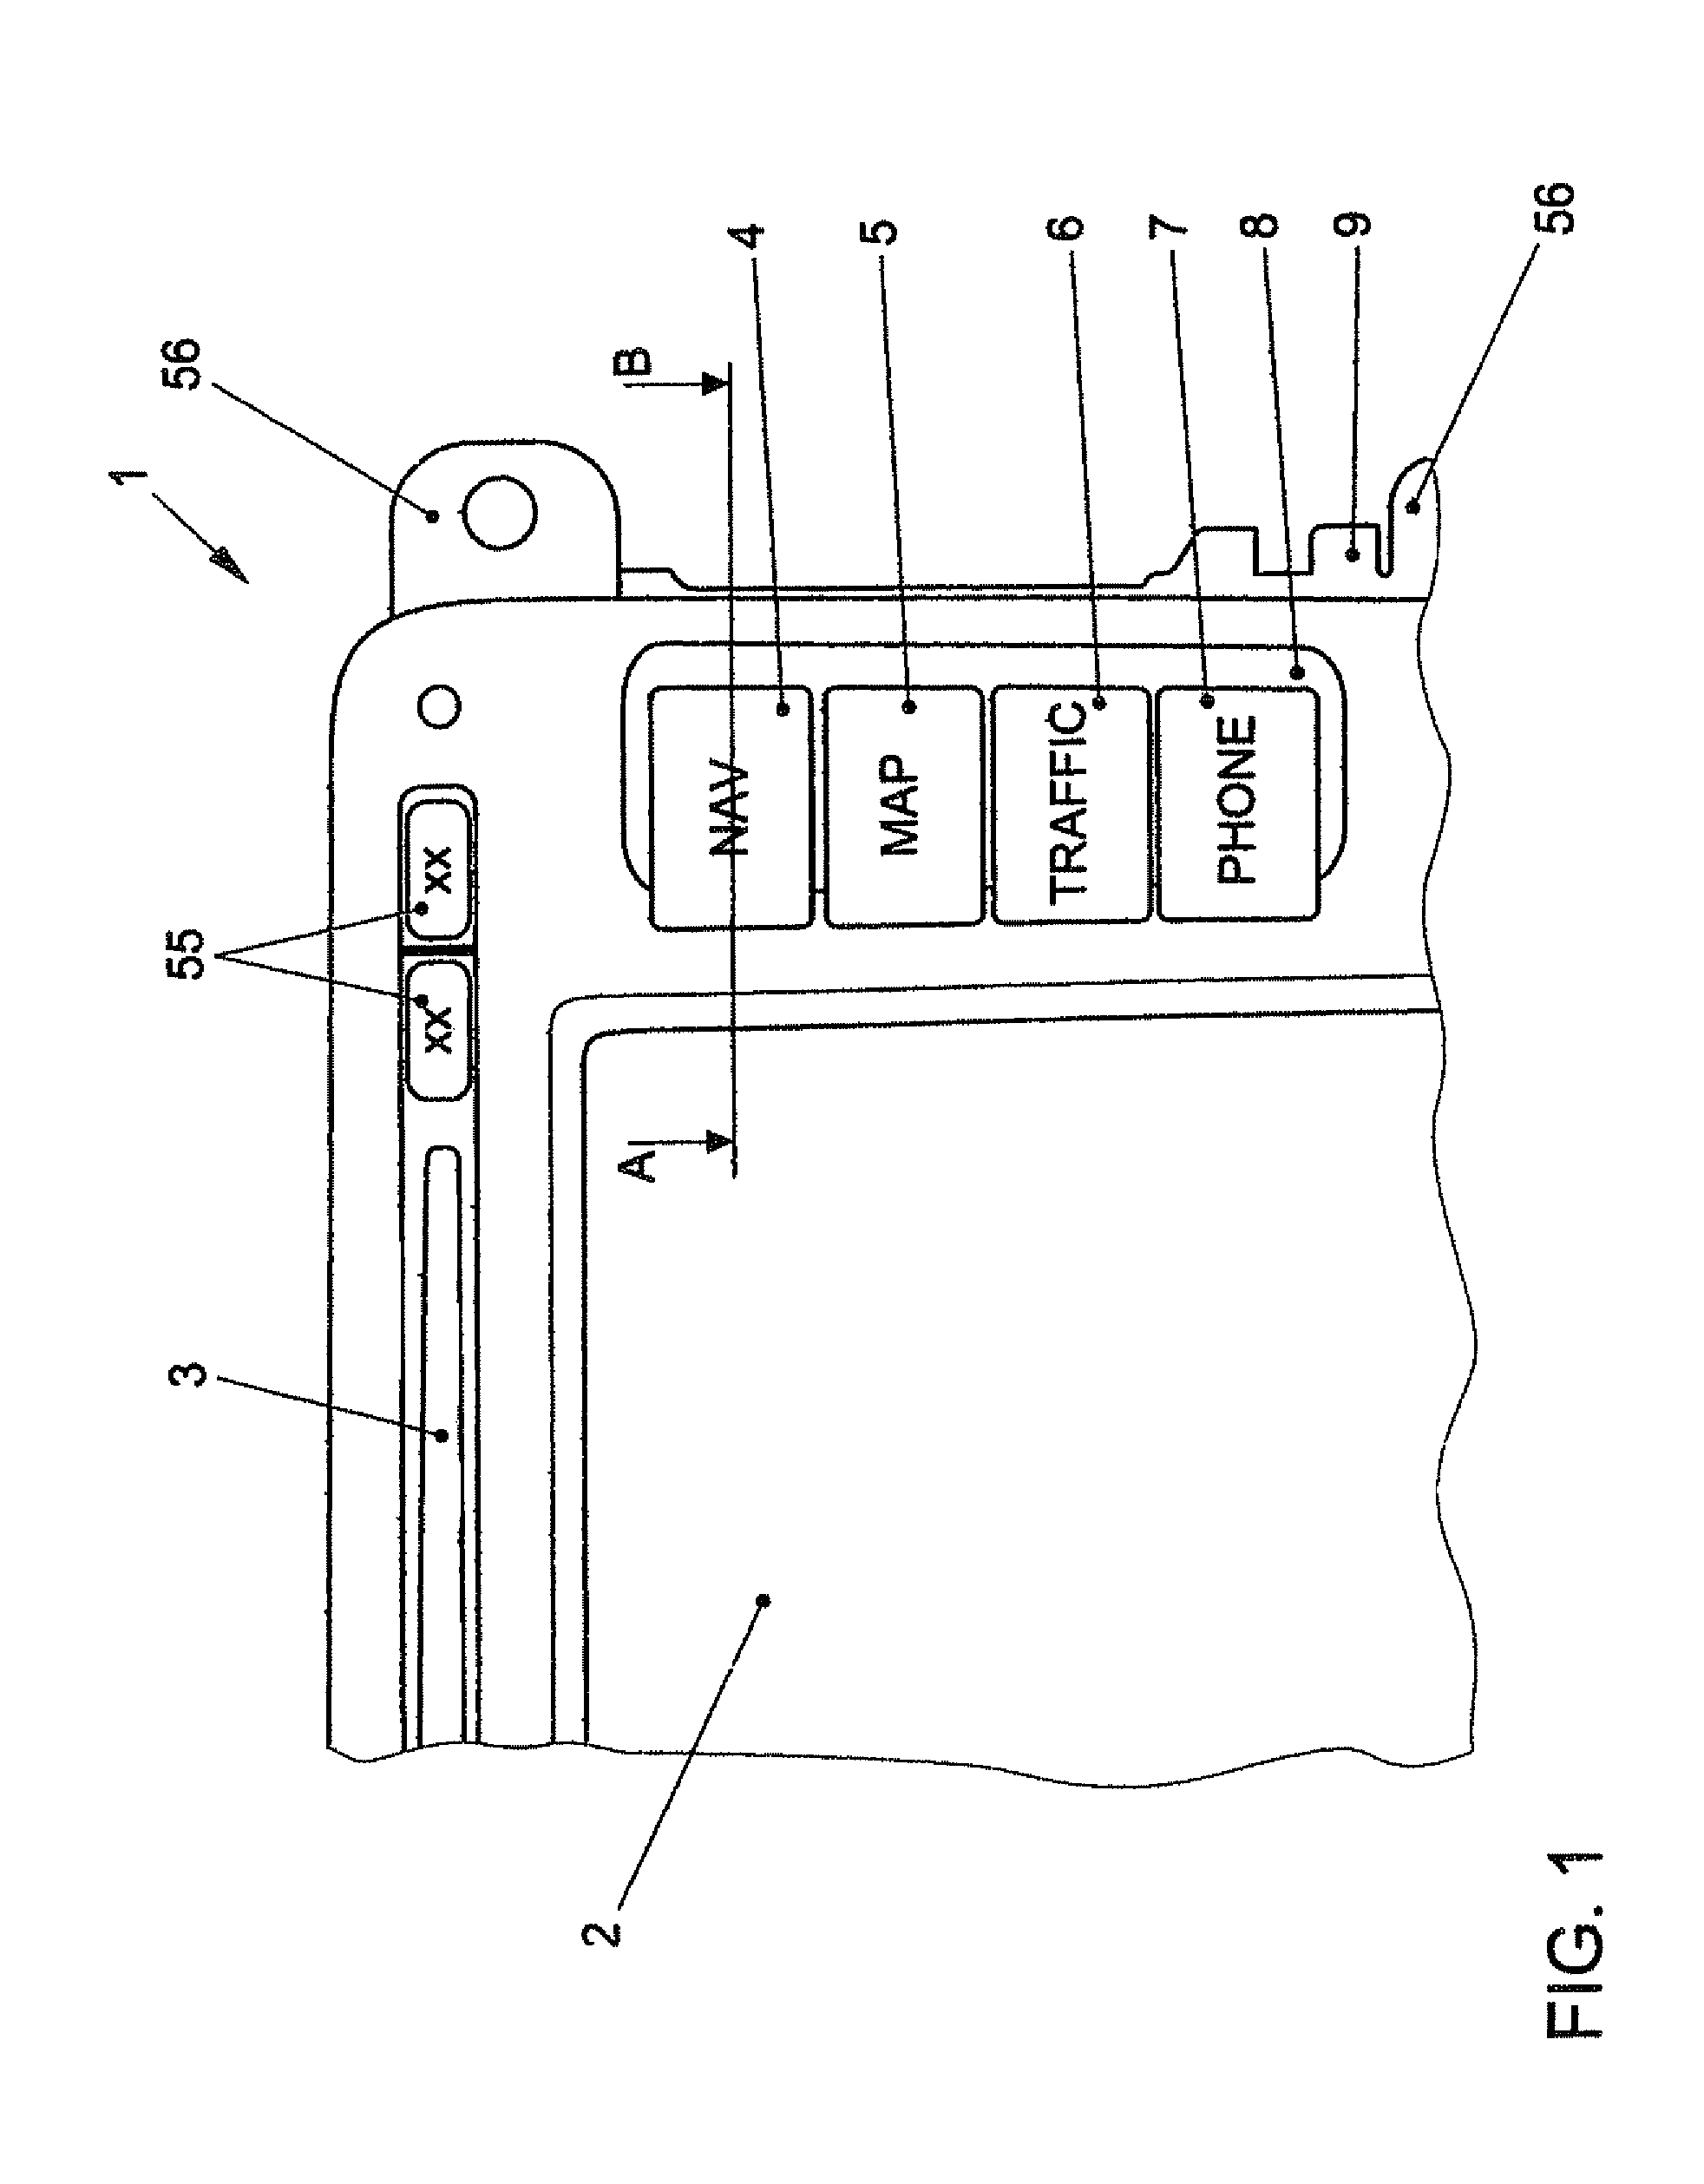 Multifunction display and operating device in a motor vehicle